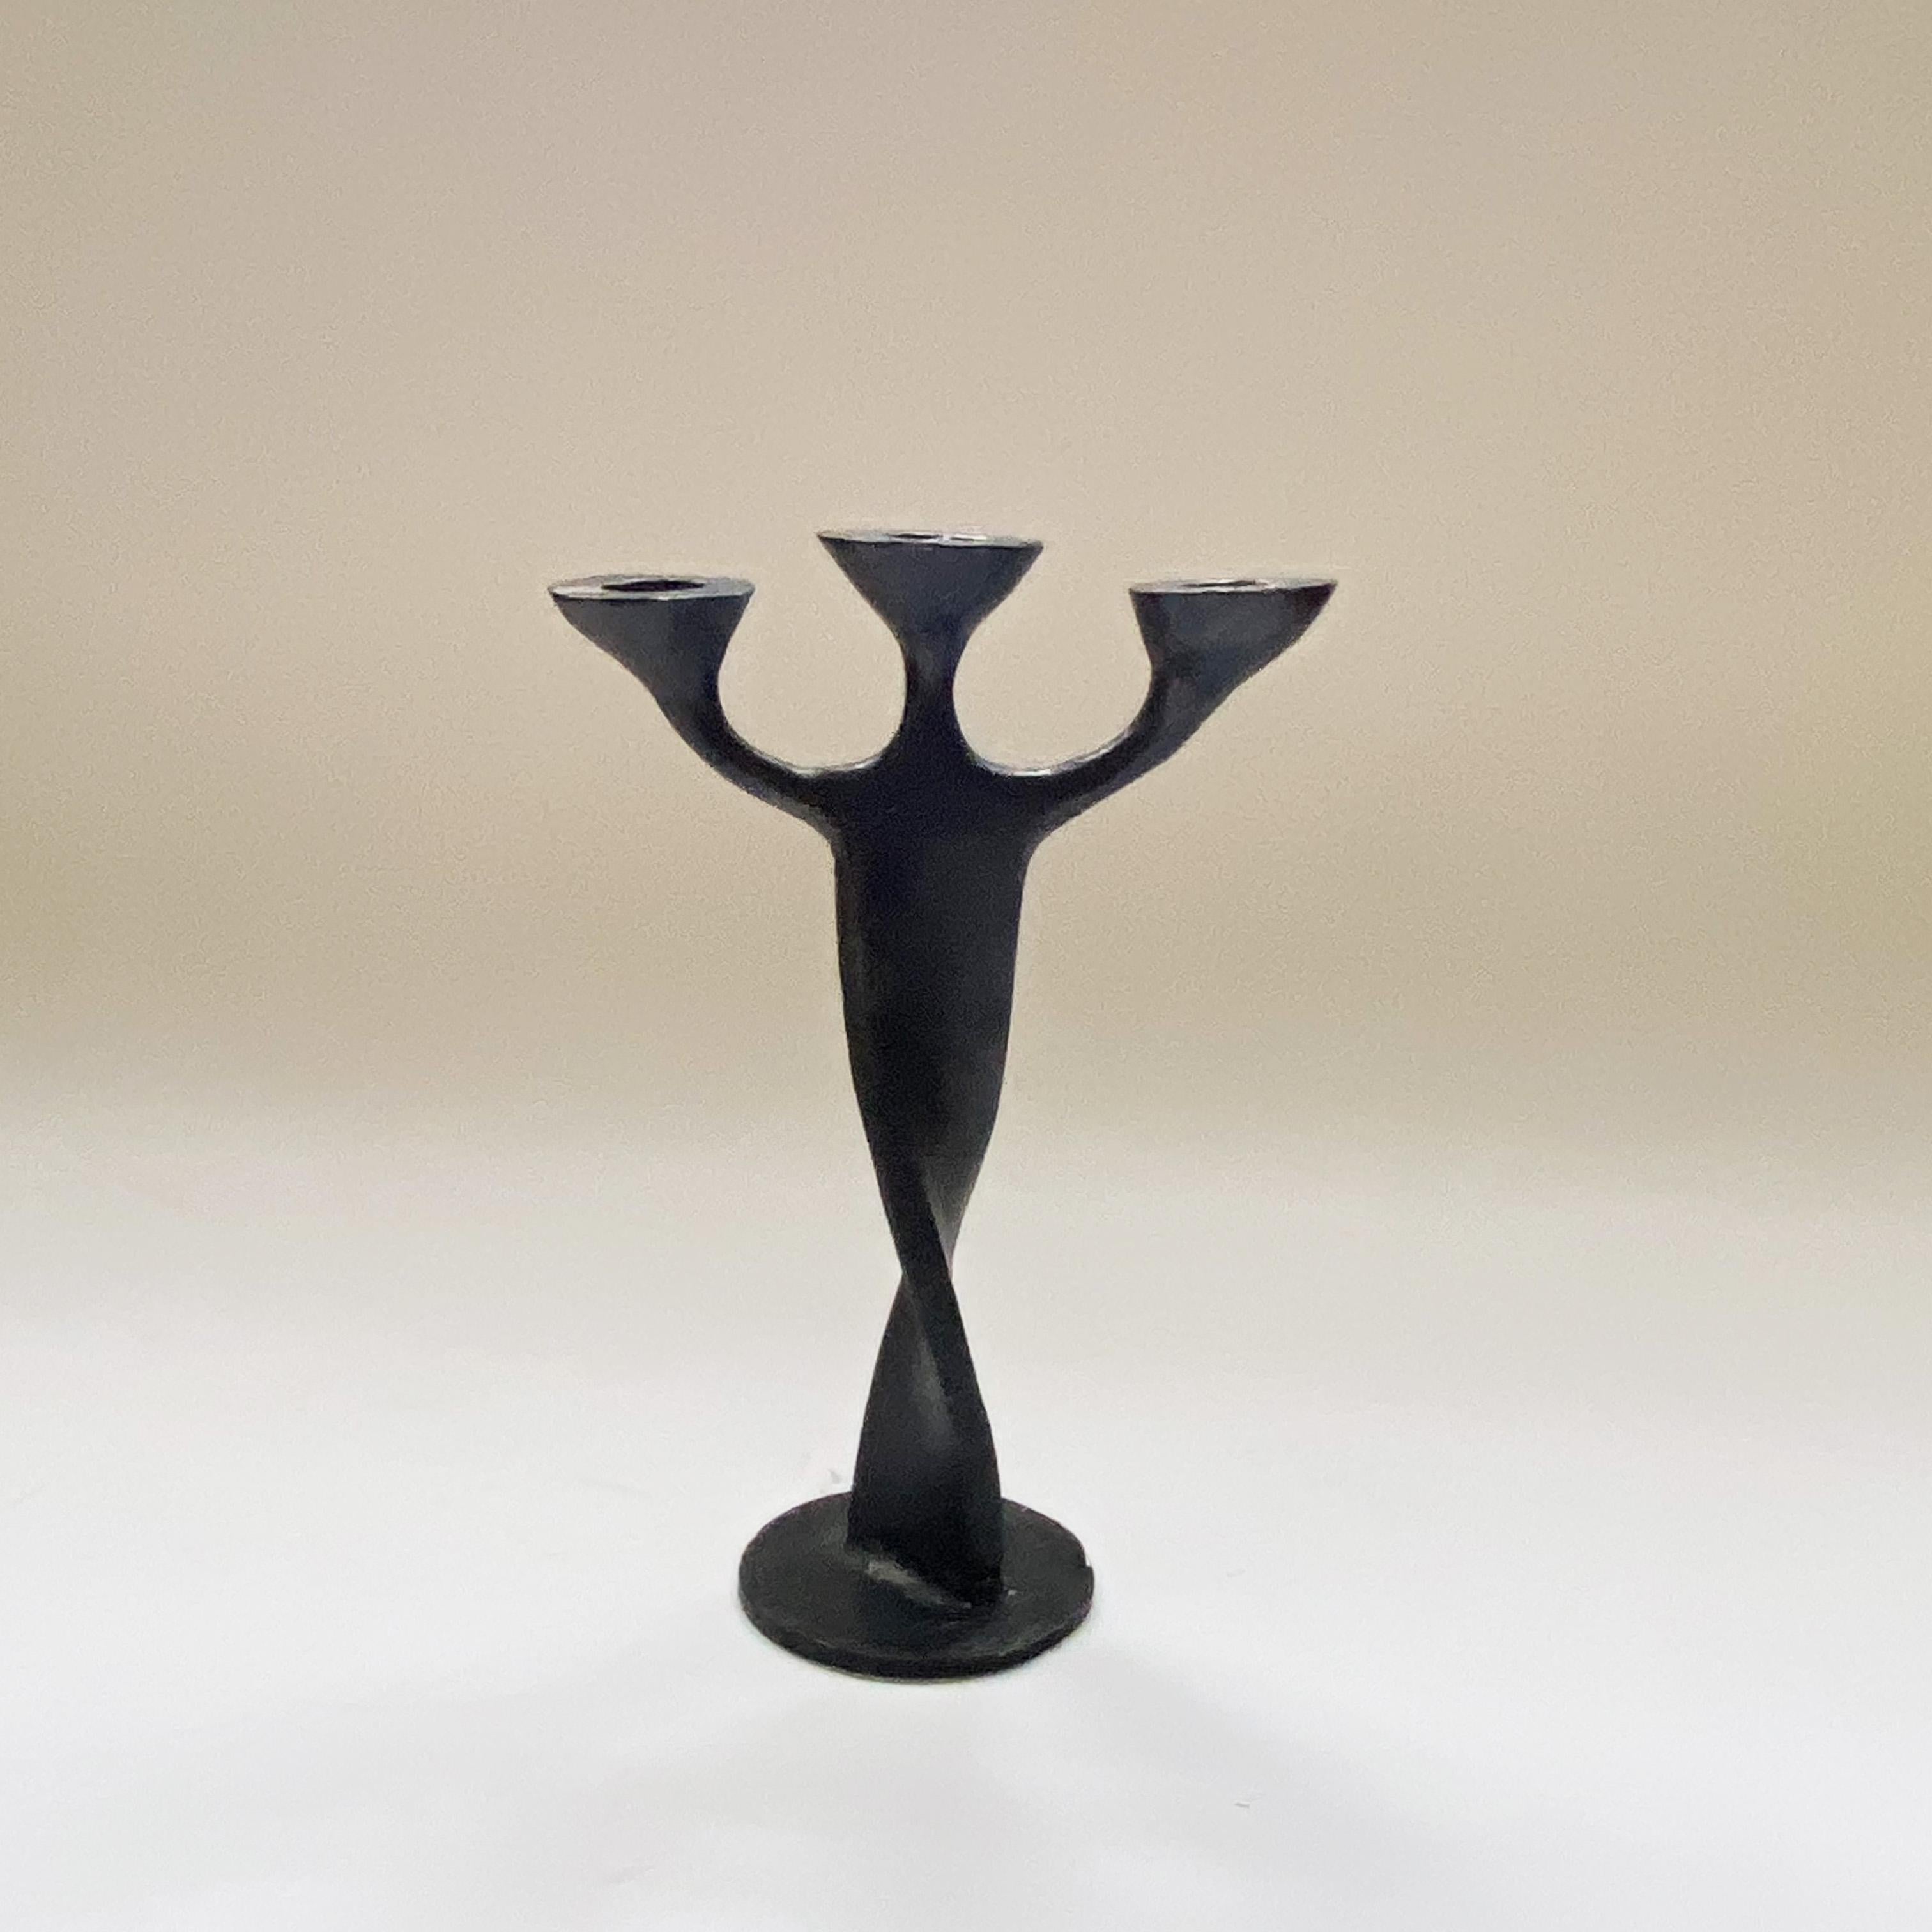 Brutalist Sculptural Candlestick by Carlos Penafiel for Fondica, 1990s. For Sale